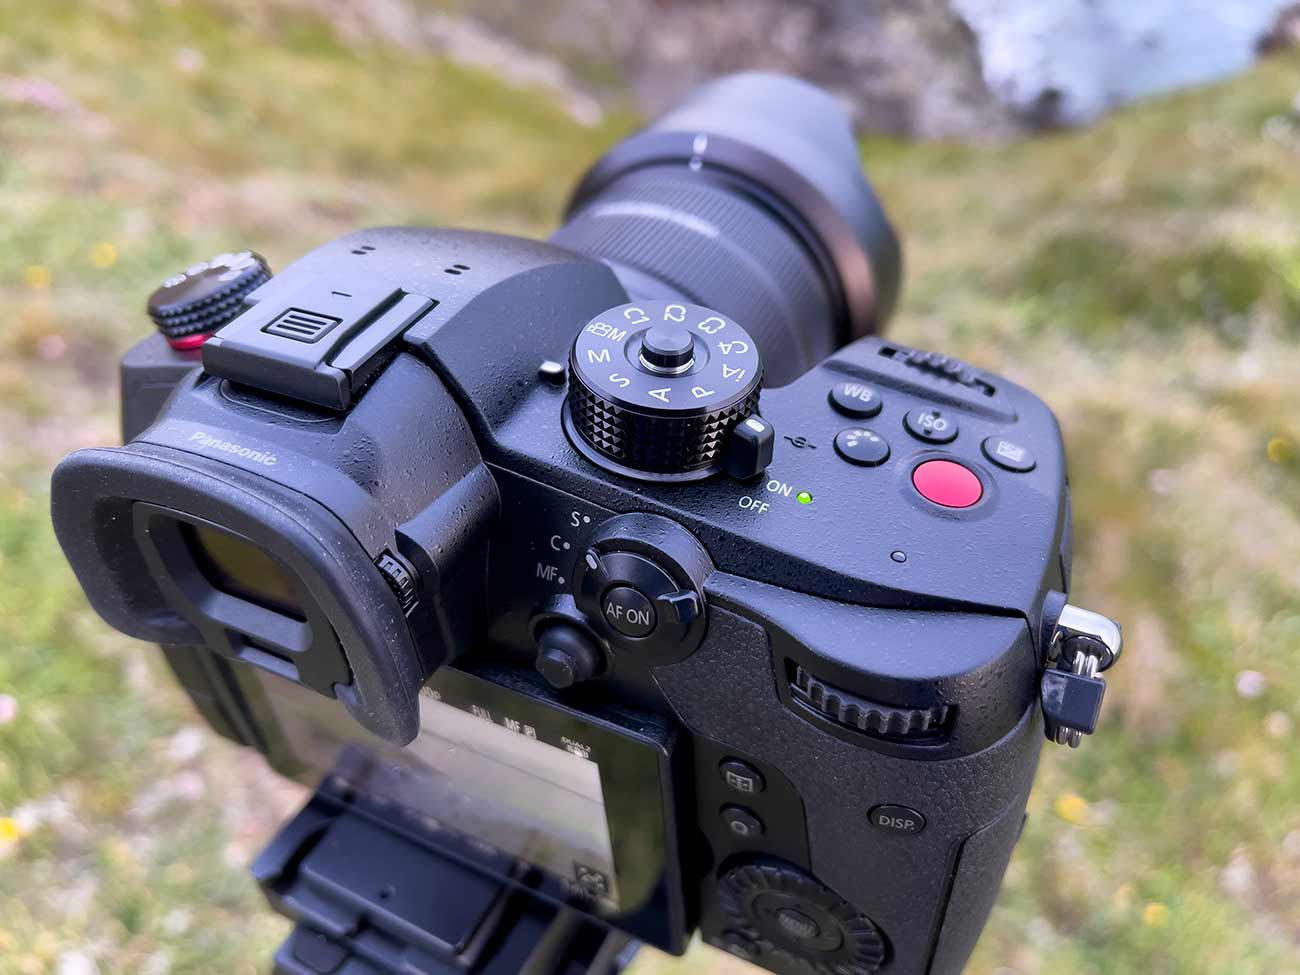 Rear quarter view of the GH5 II.